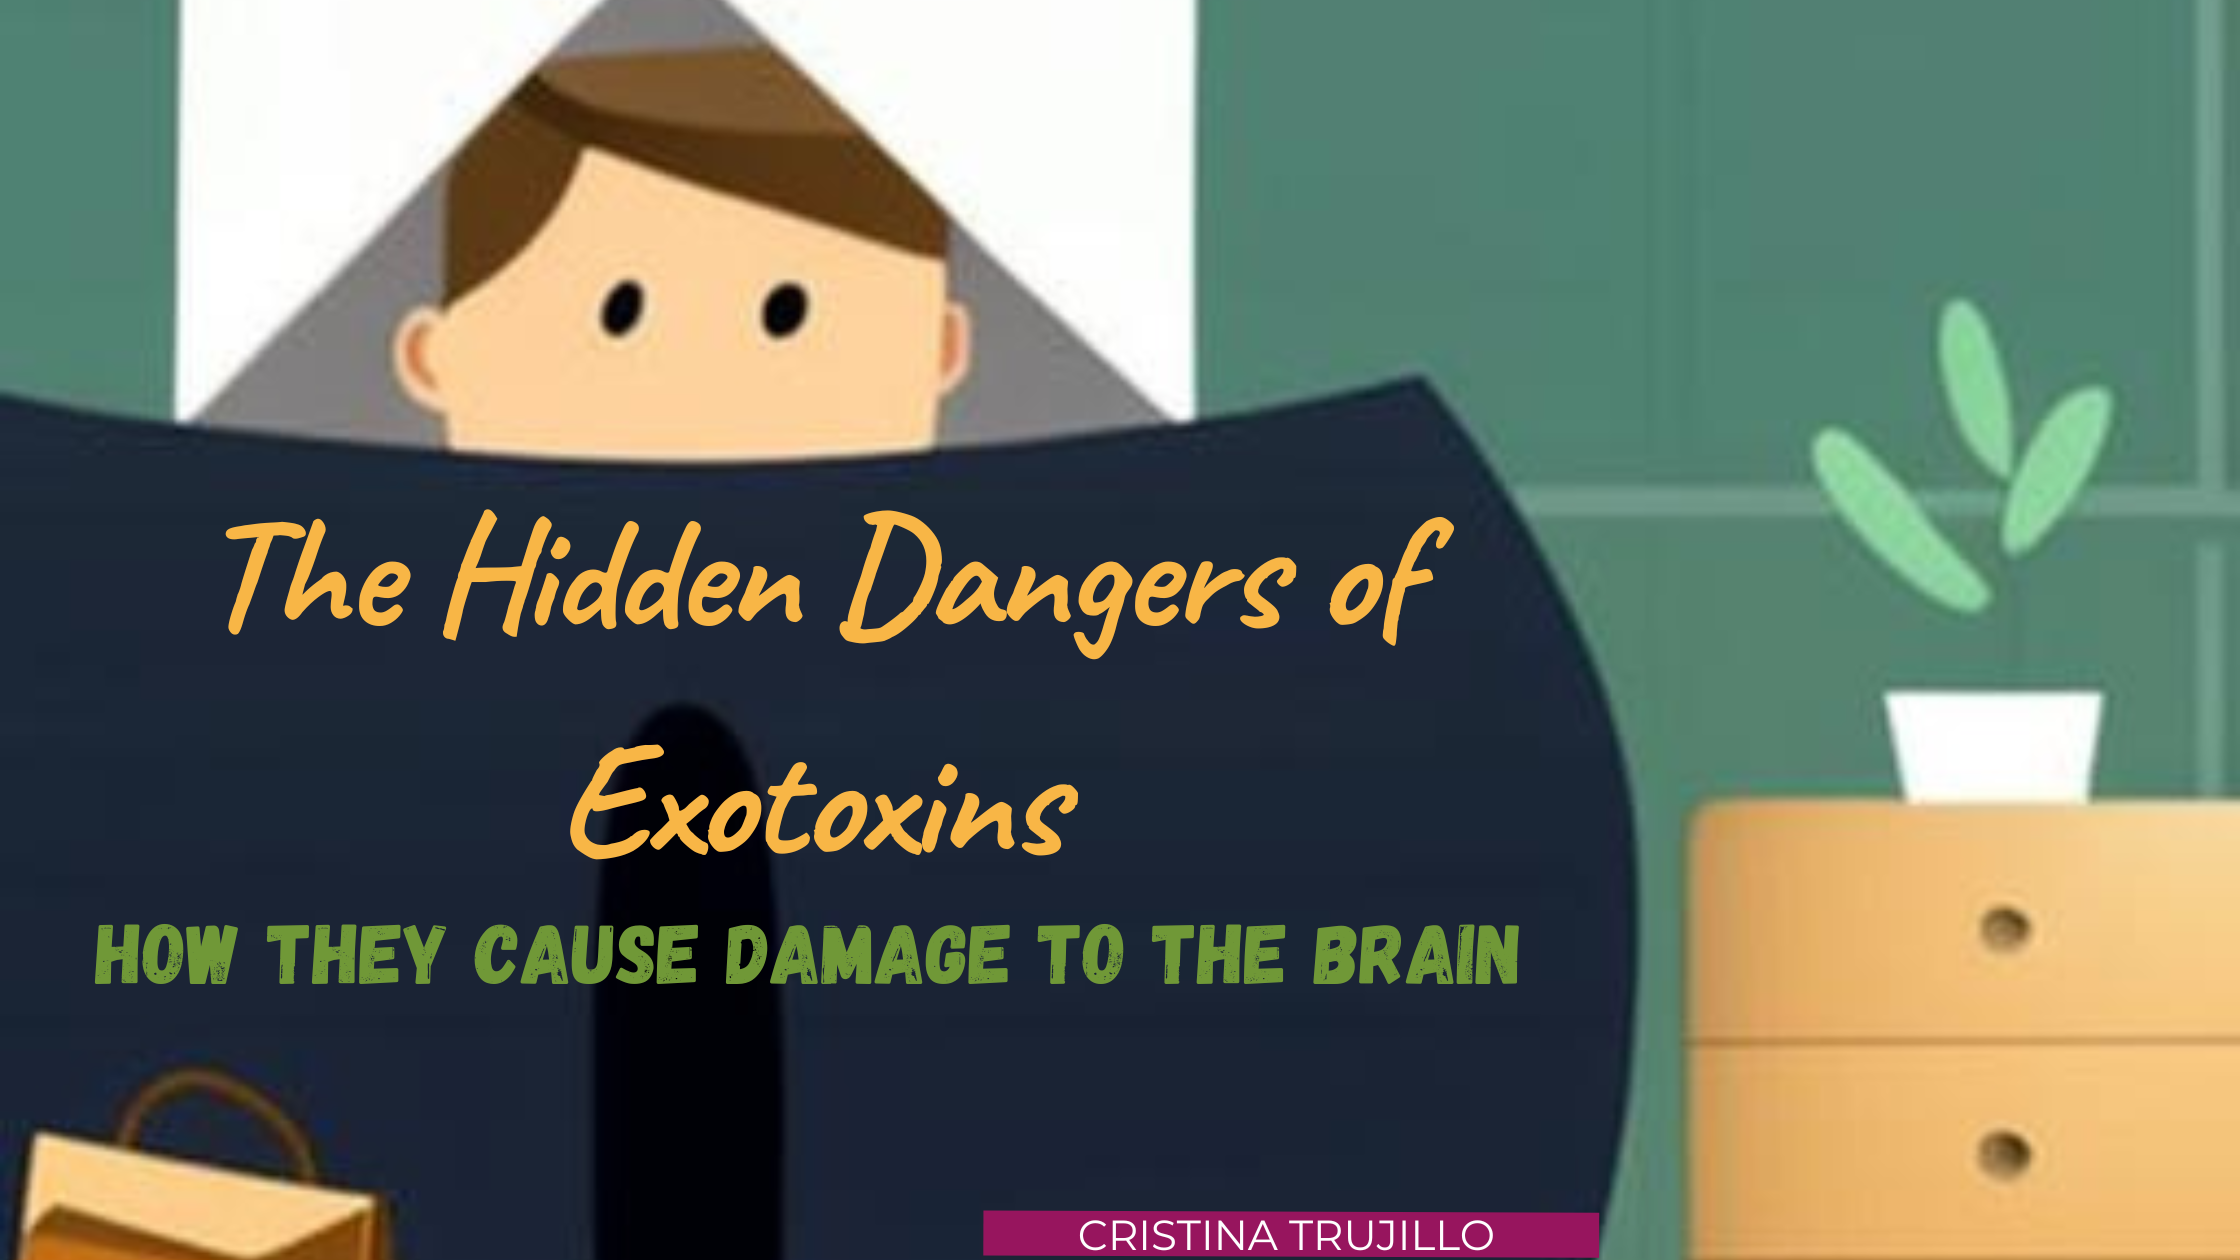 <strong>The Hidden Dangers of Exotoxins: How They Cause Damage to the Brain</strong>